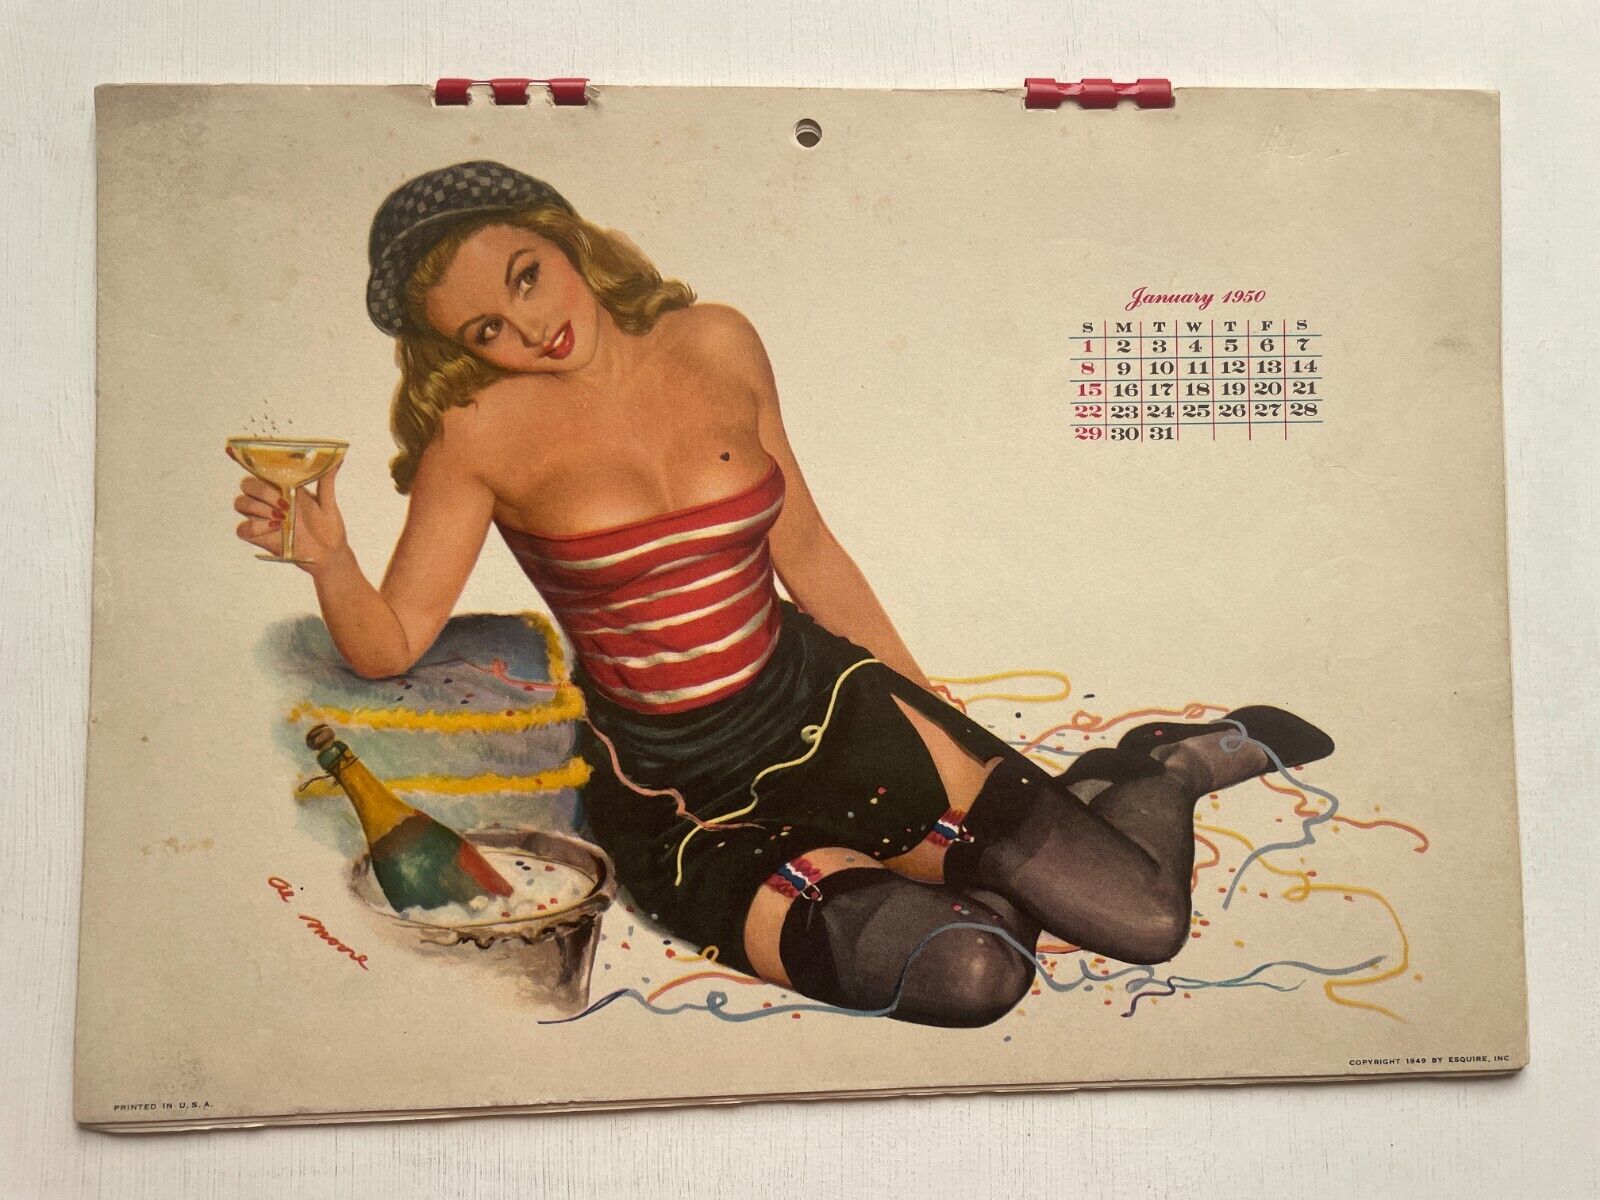 1950 Full Year 12 Month Pinup Girl Esquire Calendar by Al Moore